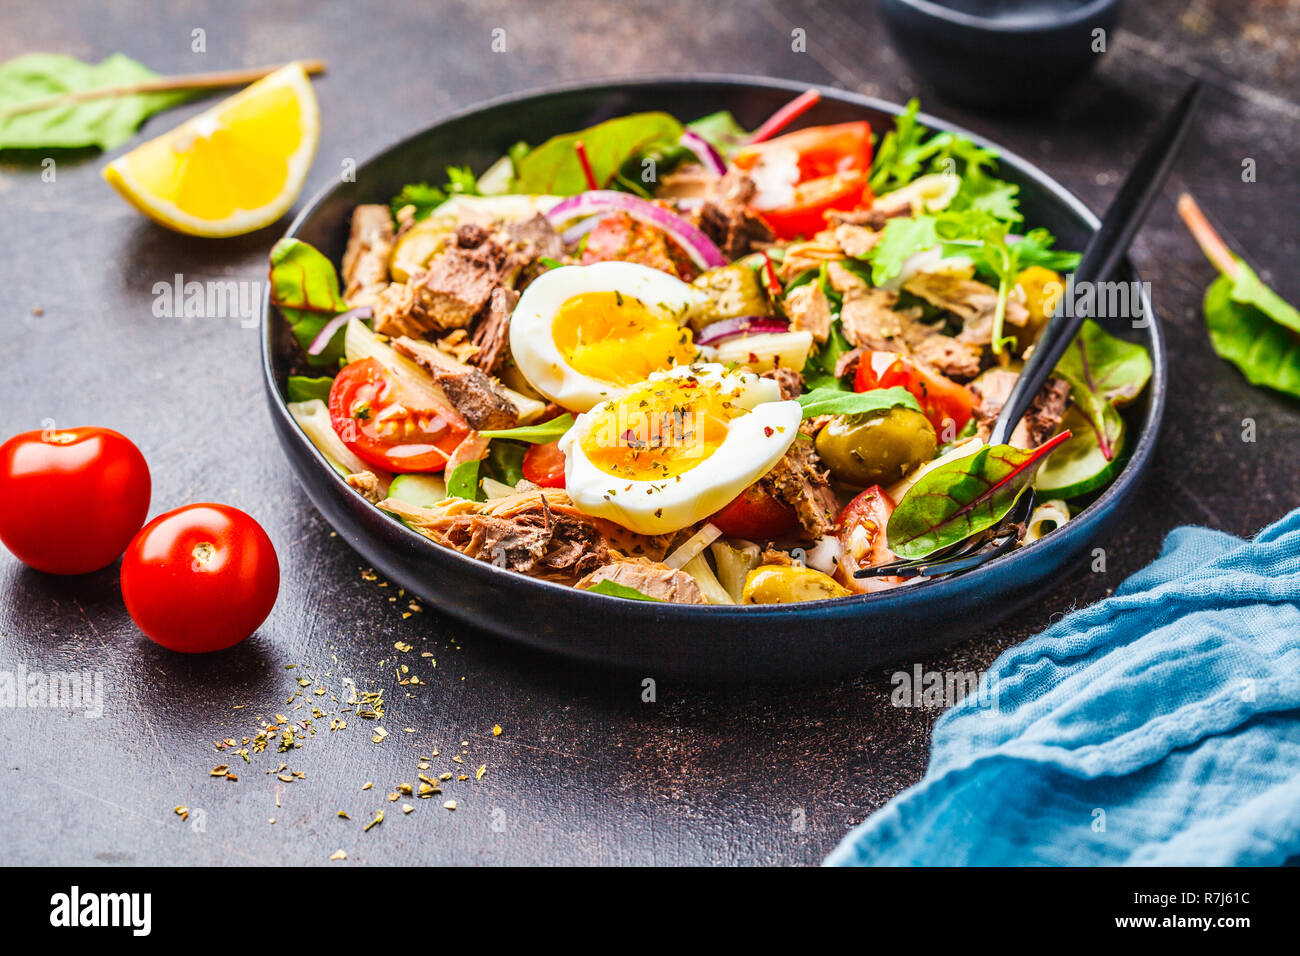 Tuna salad with pasta, olives, vegetables and poached egg in a black plate on a dark background. Stock Photo